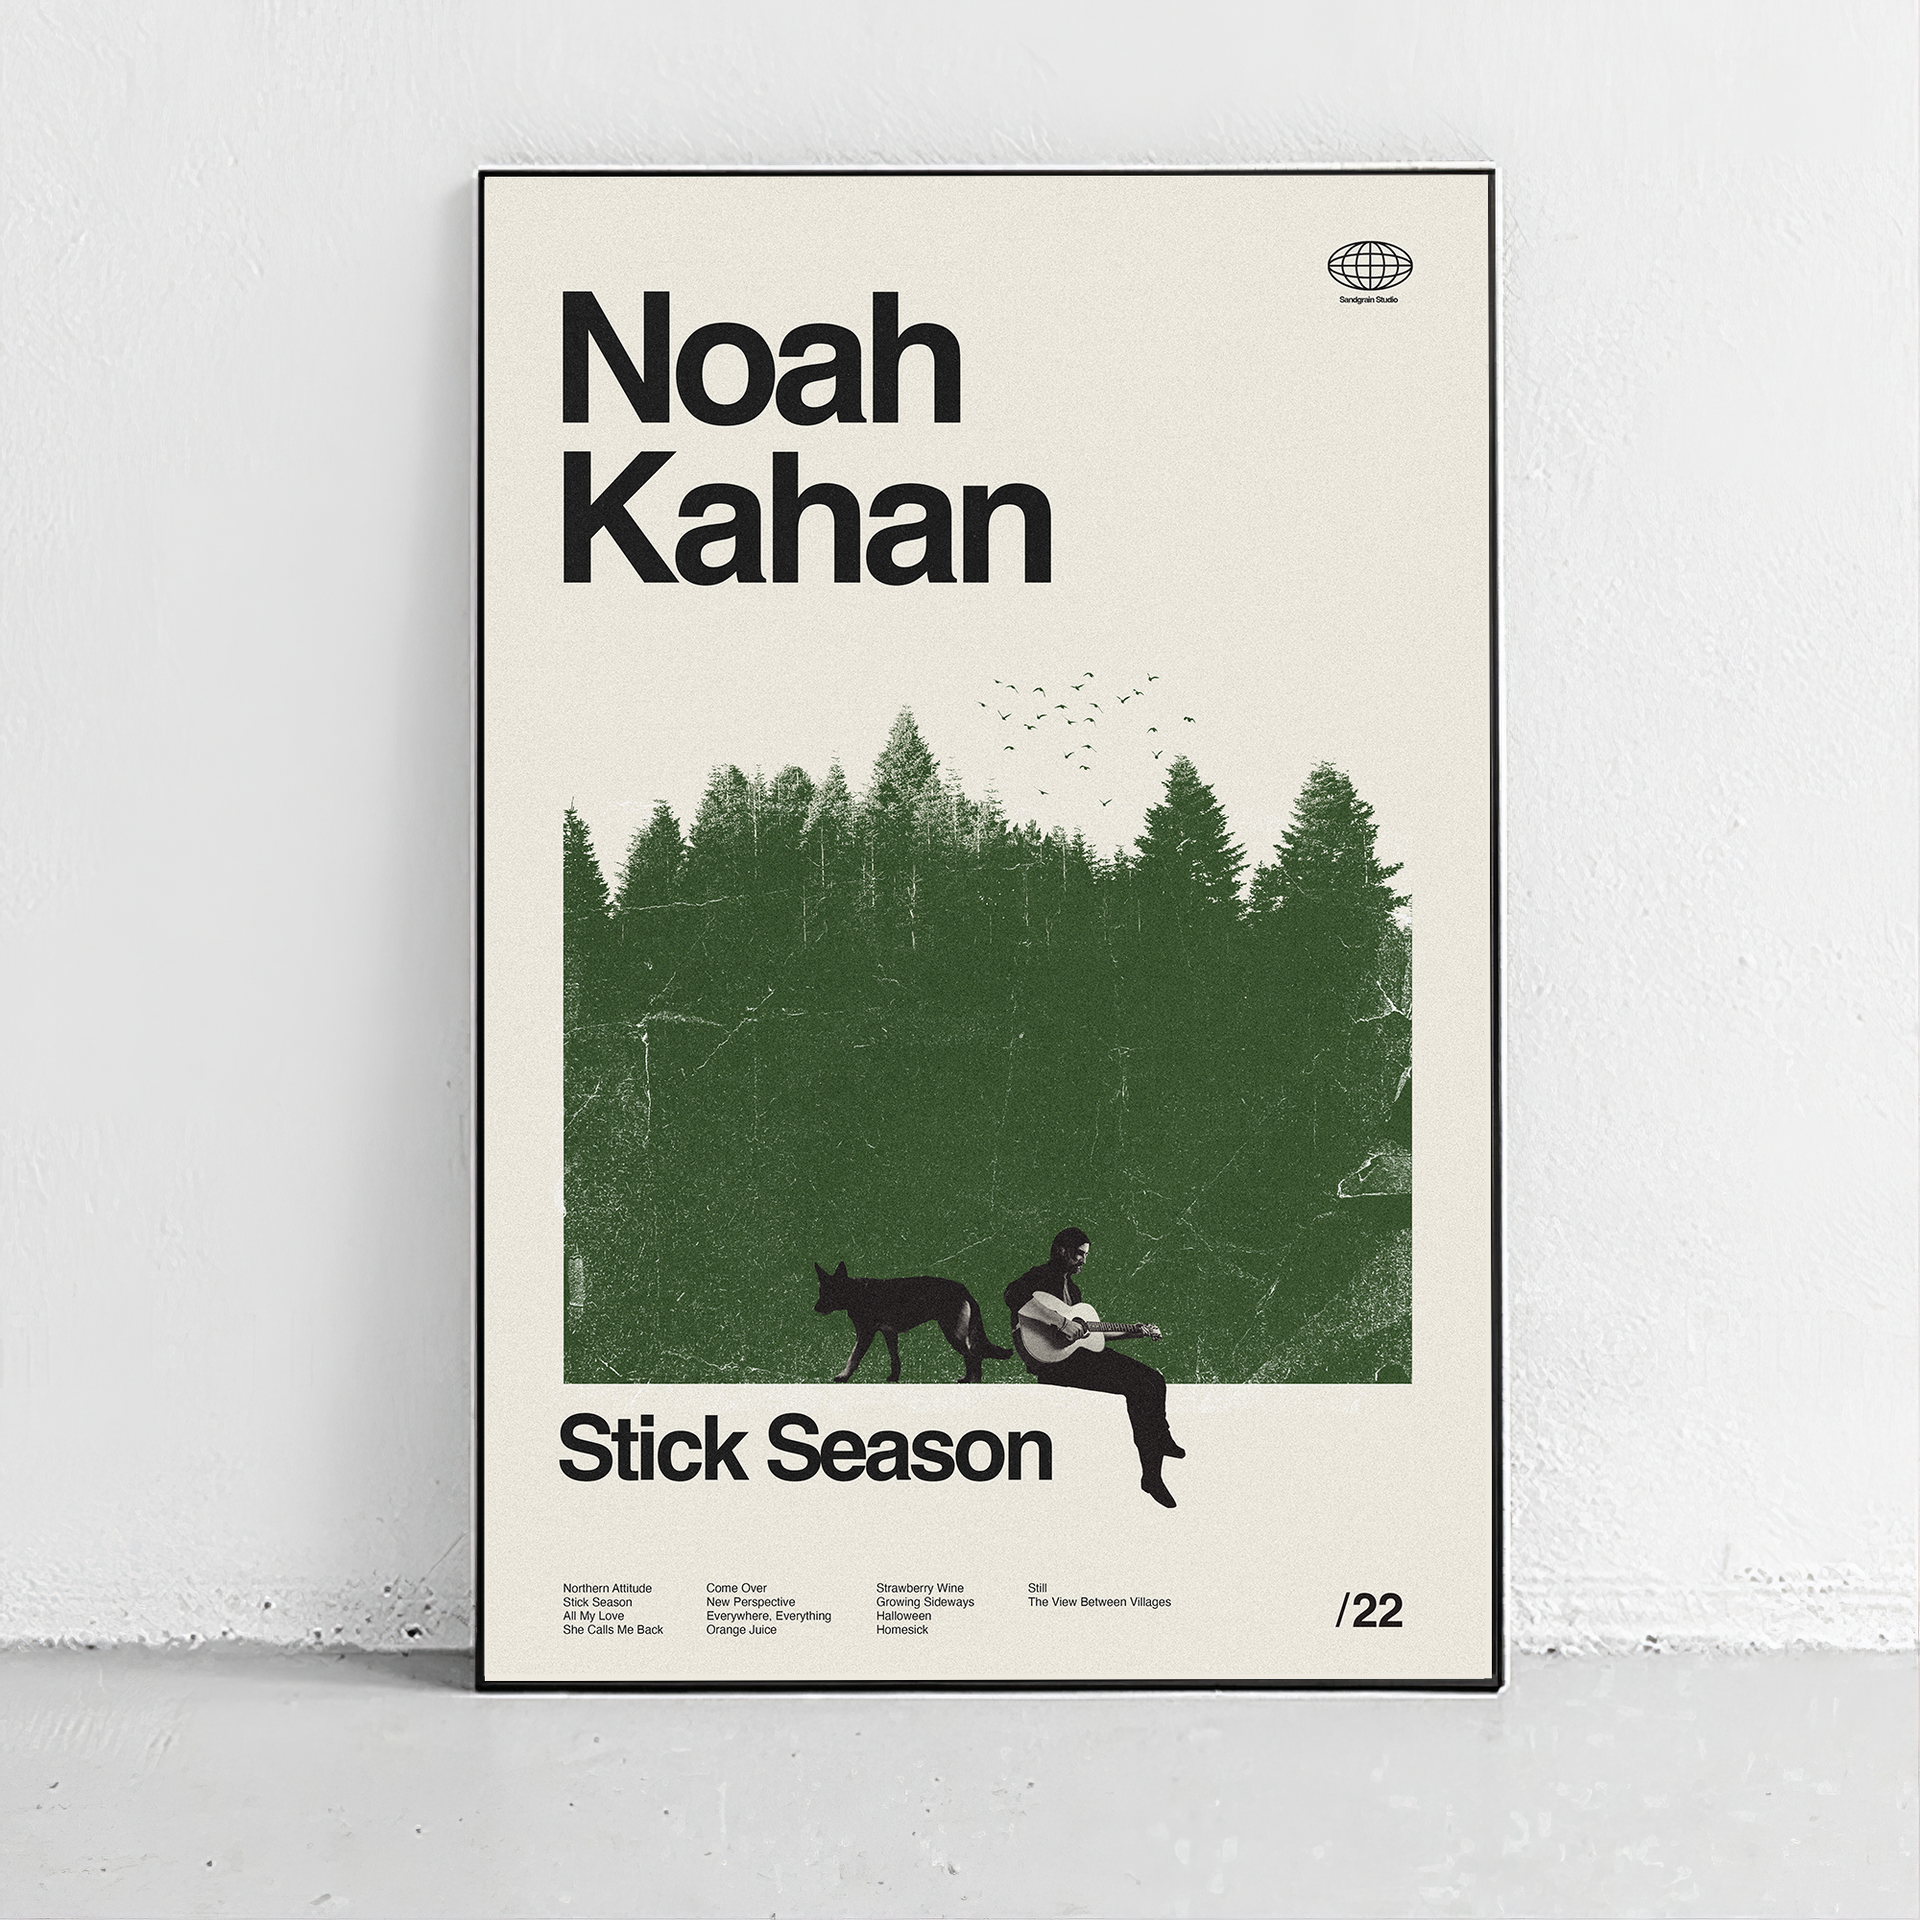 Unboxing one of our all-time favorites: Noah Kahan - Stick Season